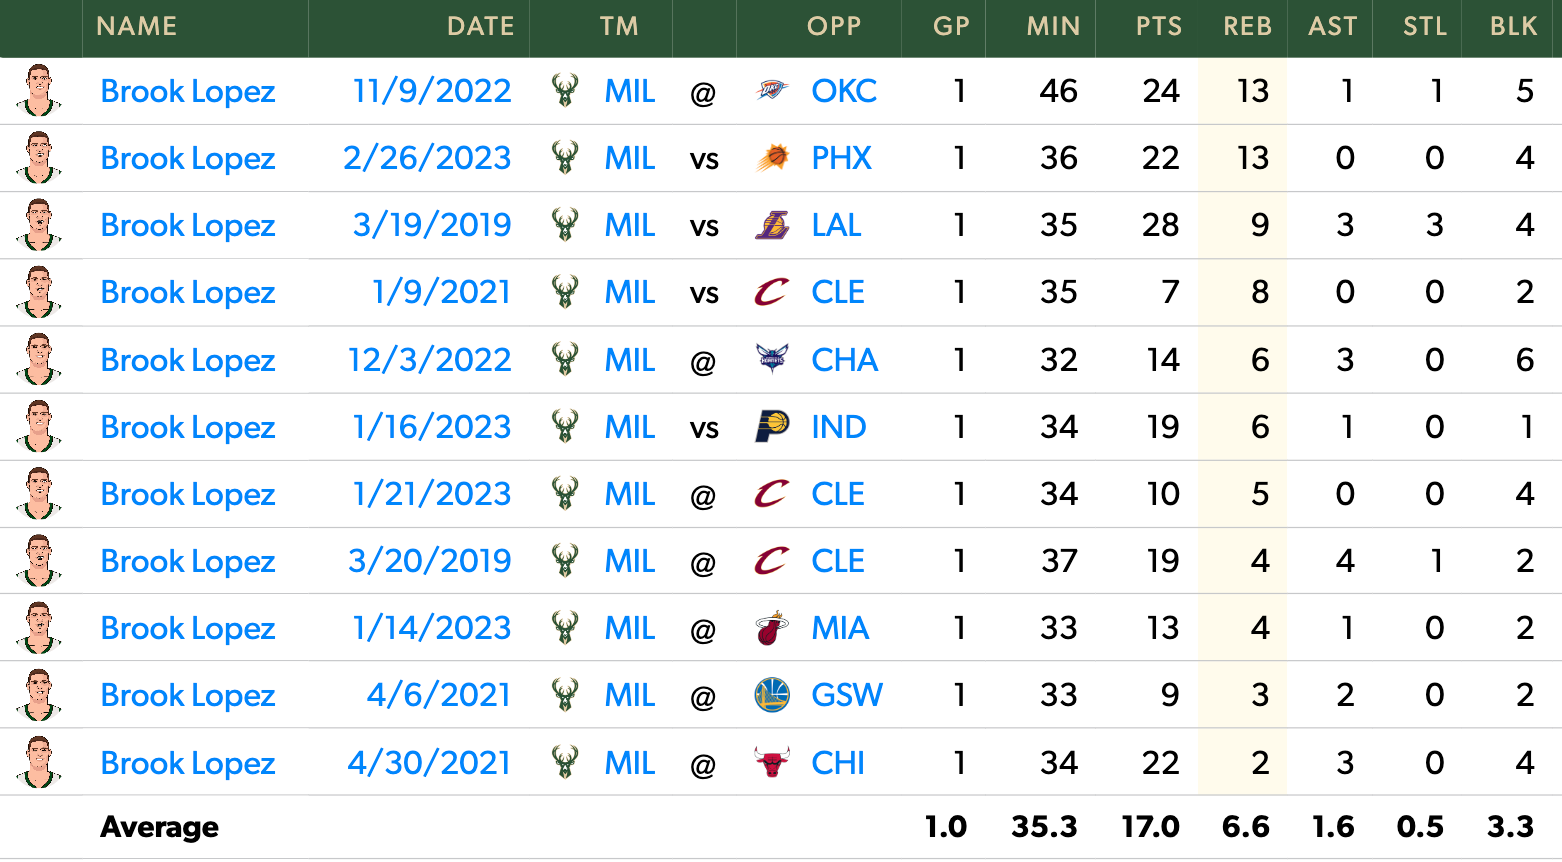 Lopez's games seeing at least 32 minutes without Giannis since joining the Bucks.